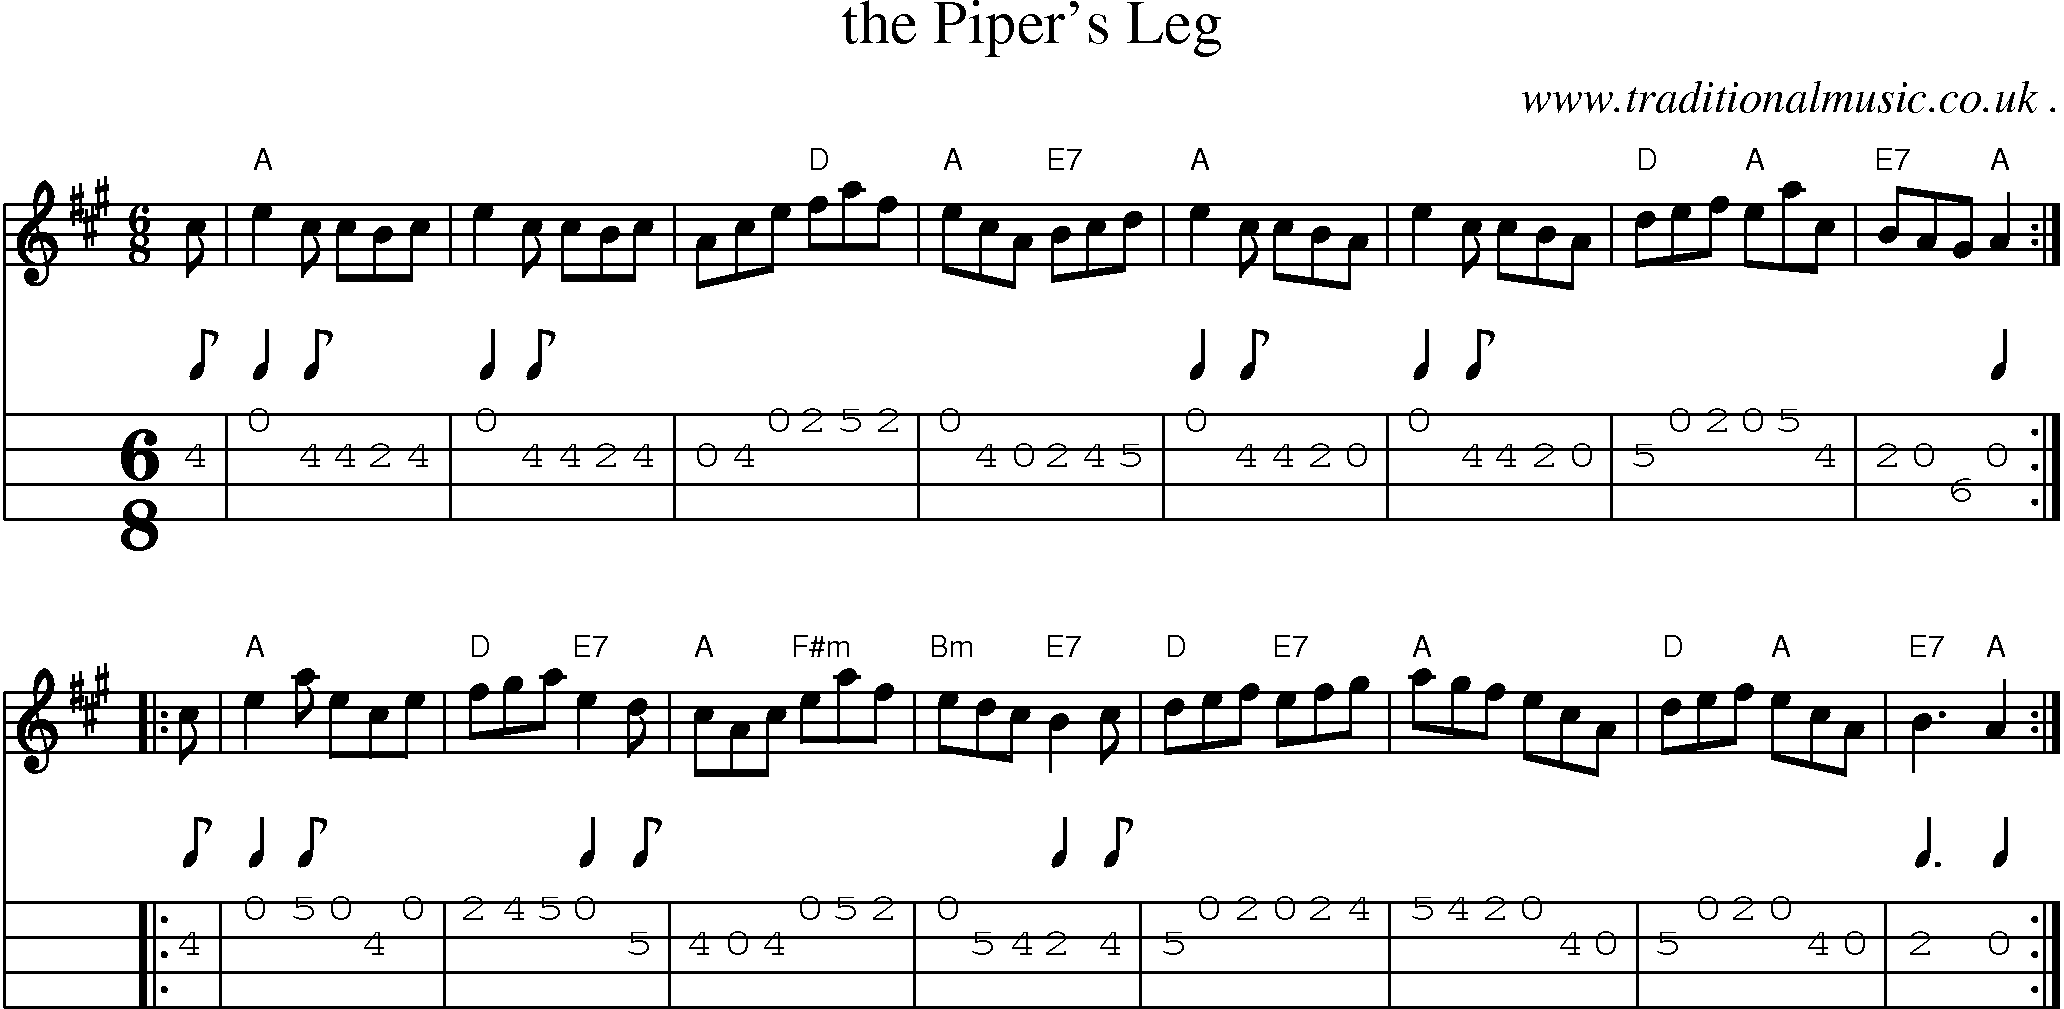 Sheet-music  score, Chords and Mandolin Tabs for The Pipers Leg